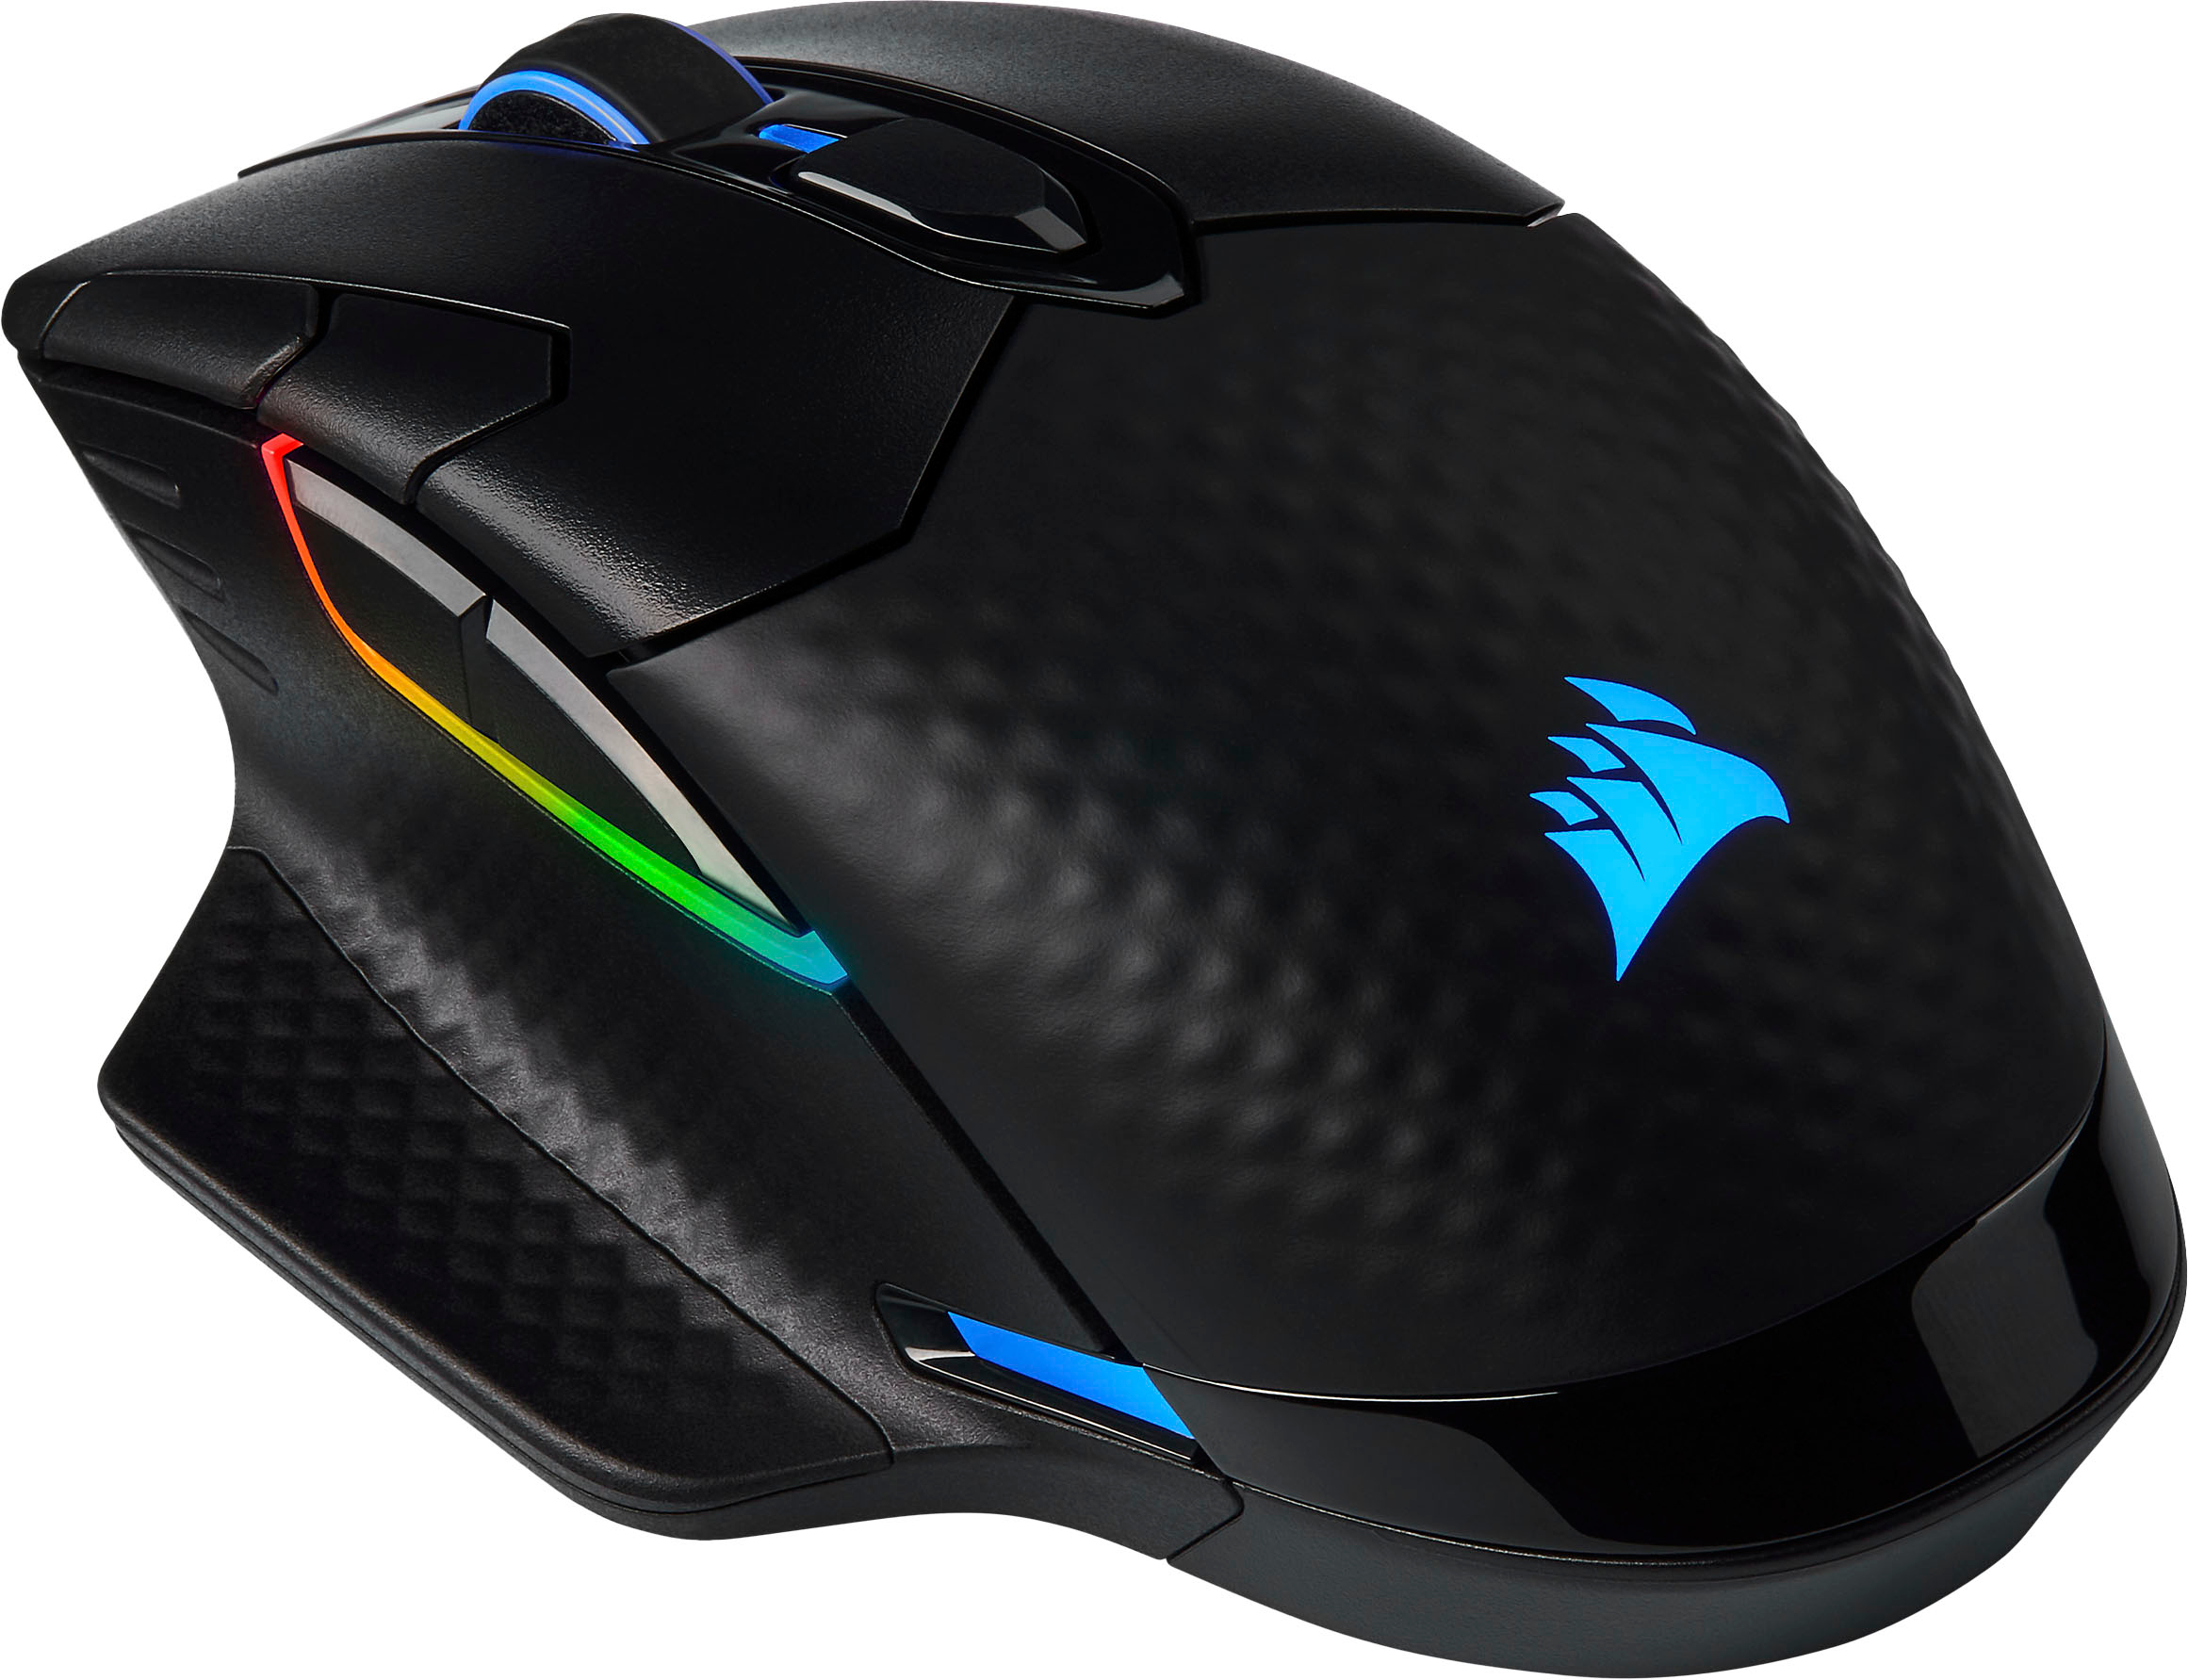 Angle View: CORSAIR - DARK CORE RGB PRO SE Wireless Optical Gaming Mouse with Qi Wireless Charging - Black